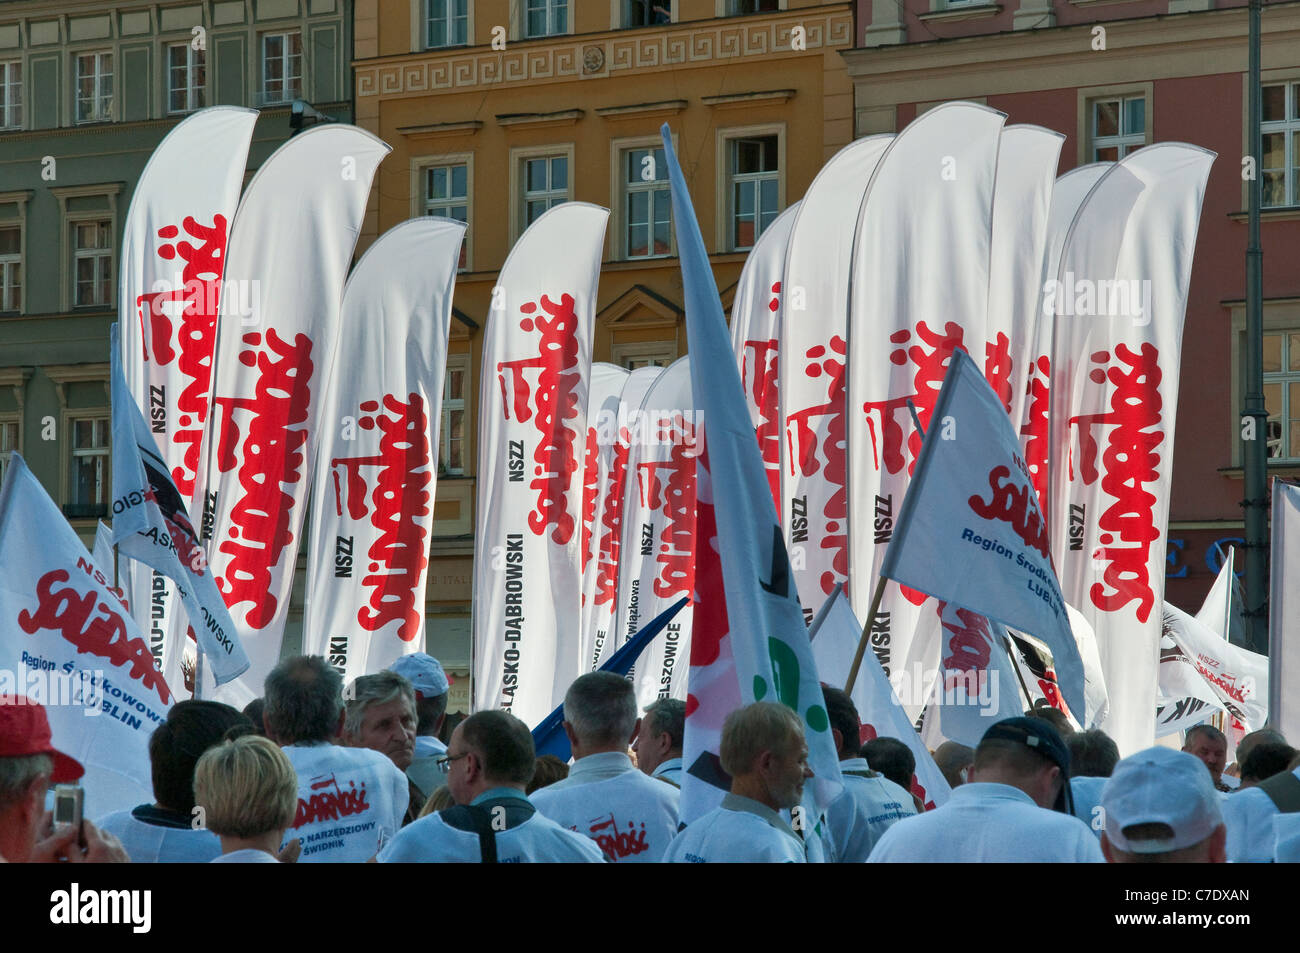 Solidarity banners, European trade unions demonstration during meeting of EU finance ministers on Sep 17, 2011 in Wroclaw Poland Stock Photo